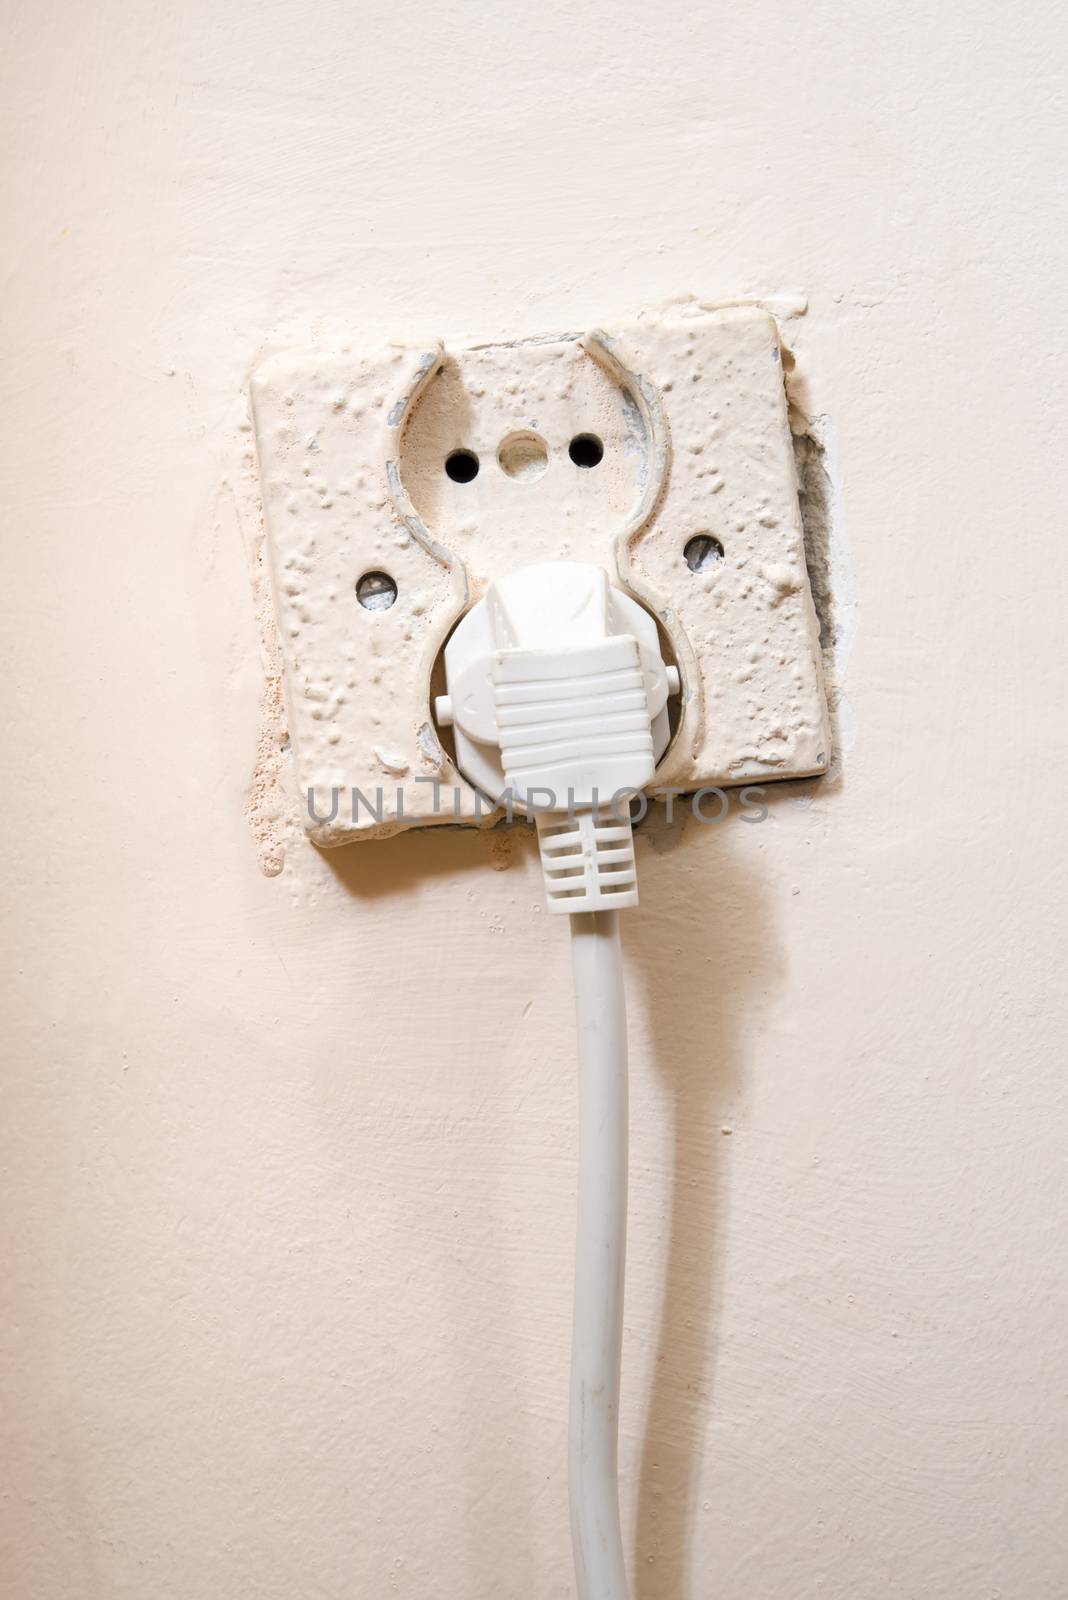 Old power socket with cable by savcoco